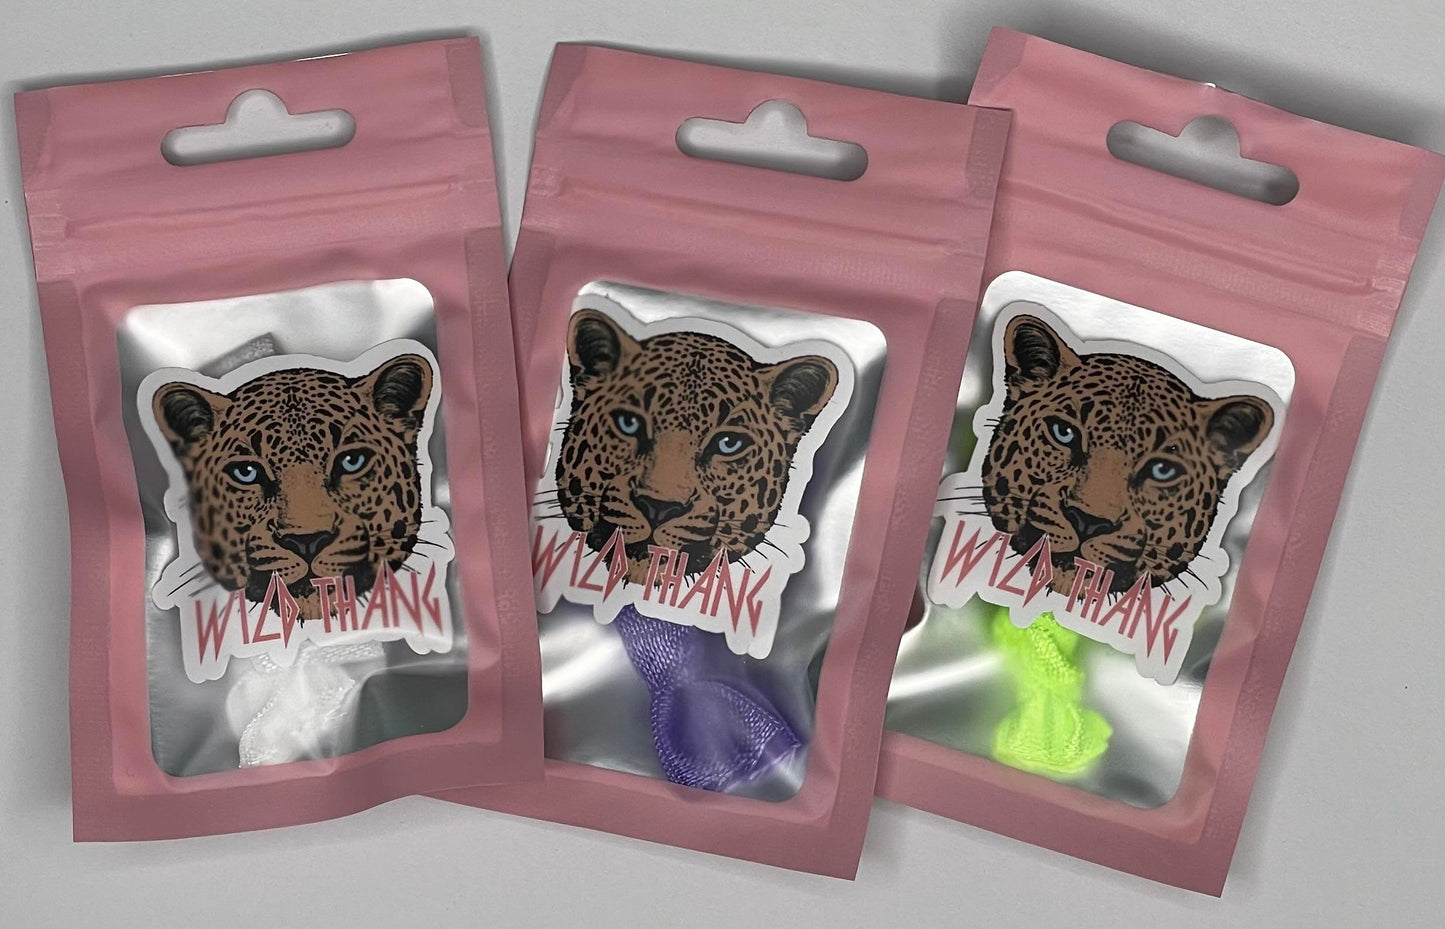 1A20 - PACKAGE FILLERS - WILD THANG BUNDLE - CREASELESS HAIR TIE